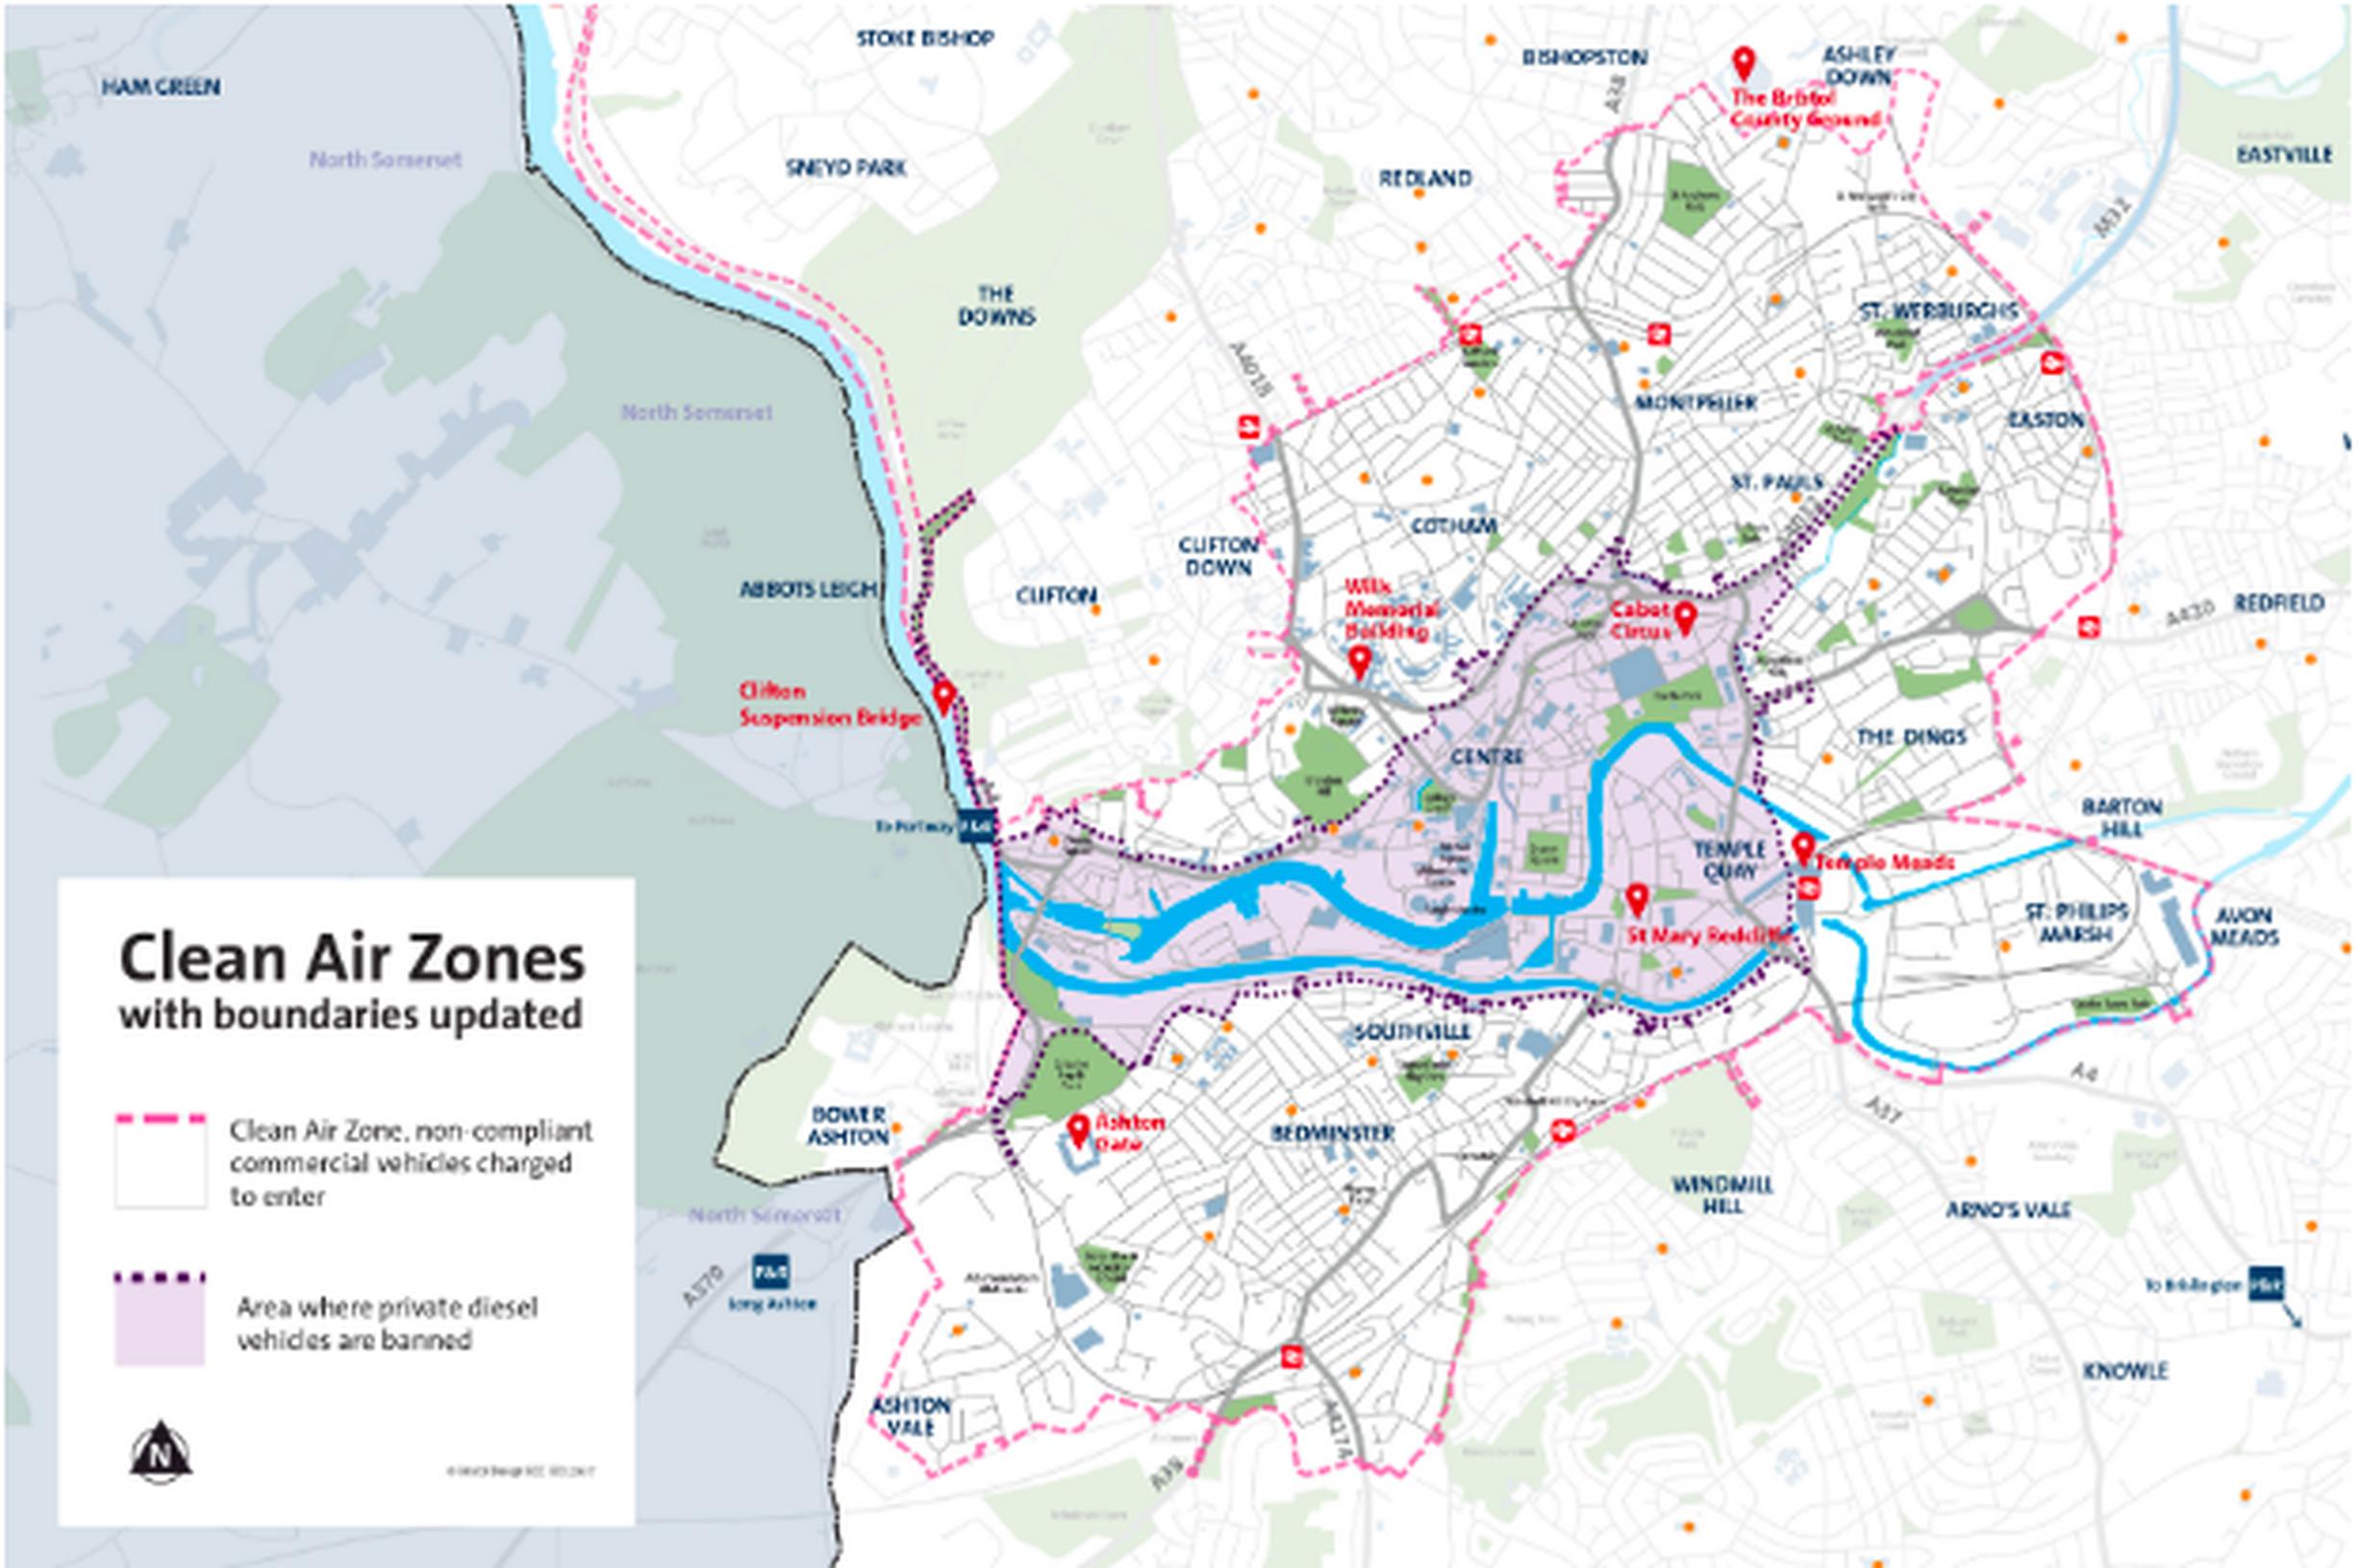 The diesel ban area (pink, centre) and charging zone (bounded by pink dotted line) proposed by Bristol City Council under its Clean Air Zone plan. Source: Bristol City Council